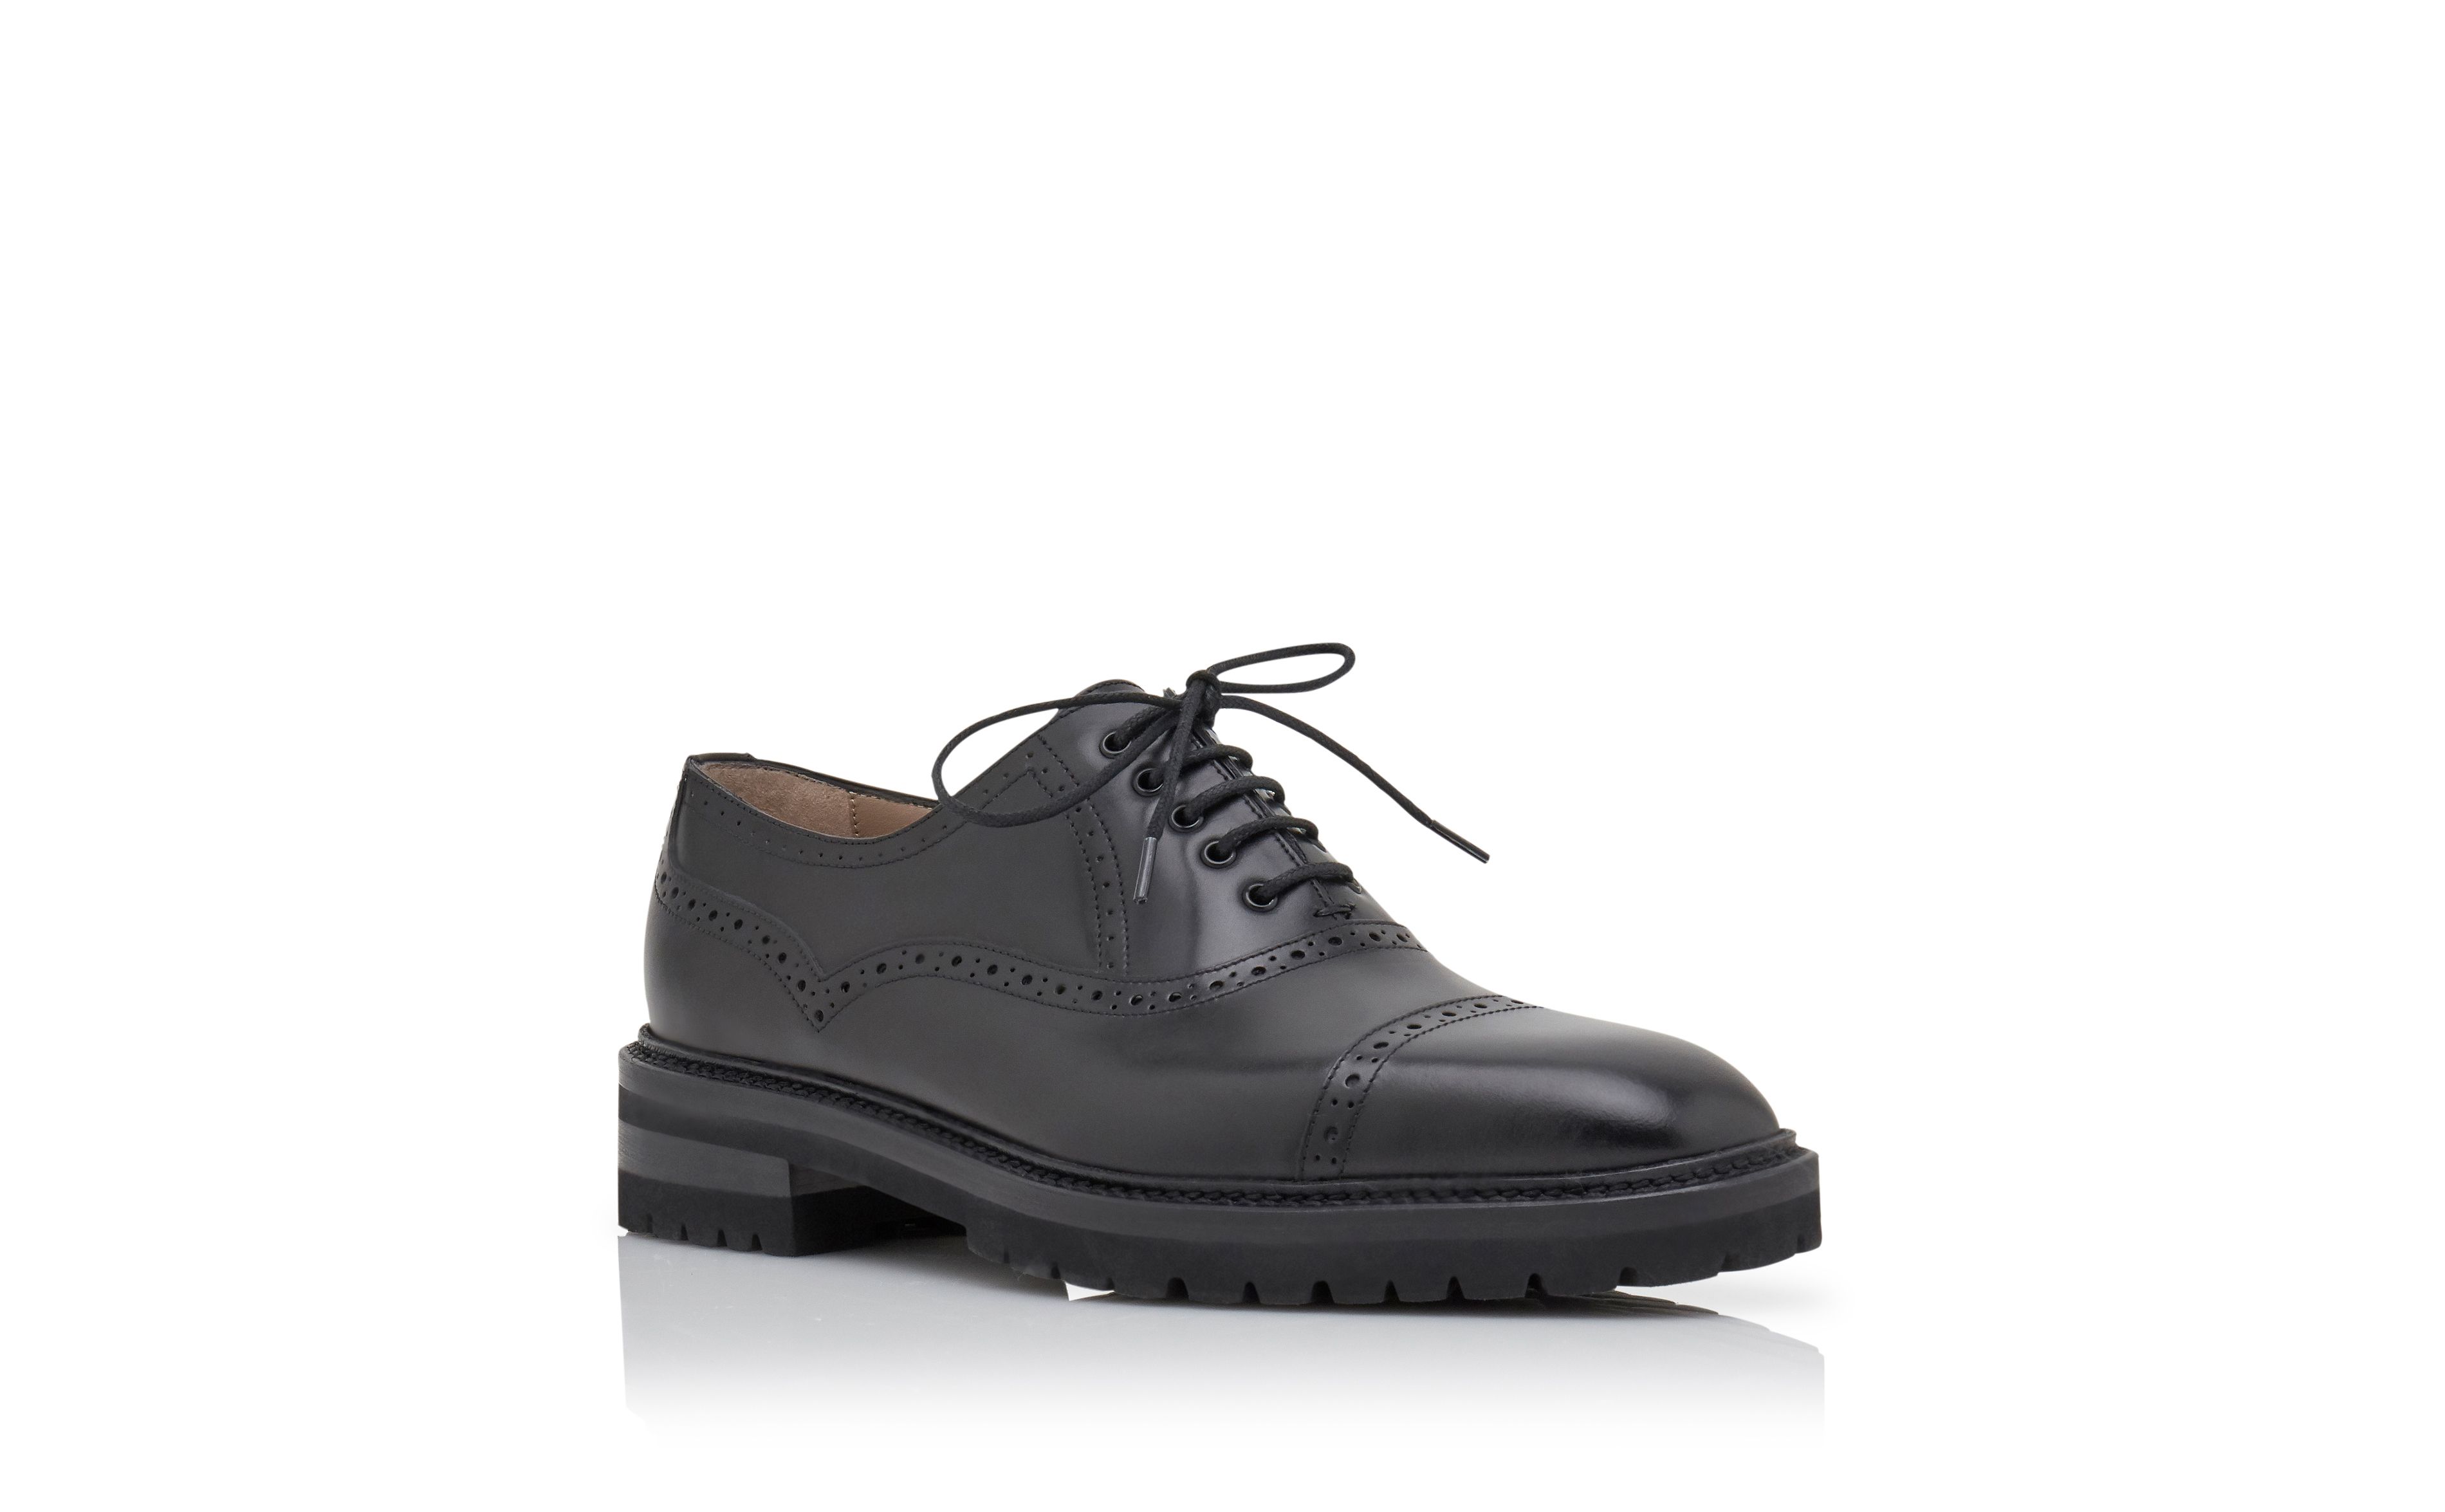 Designer Black Calf Leather Lace Up Shoes - Image Upsell